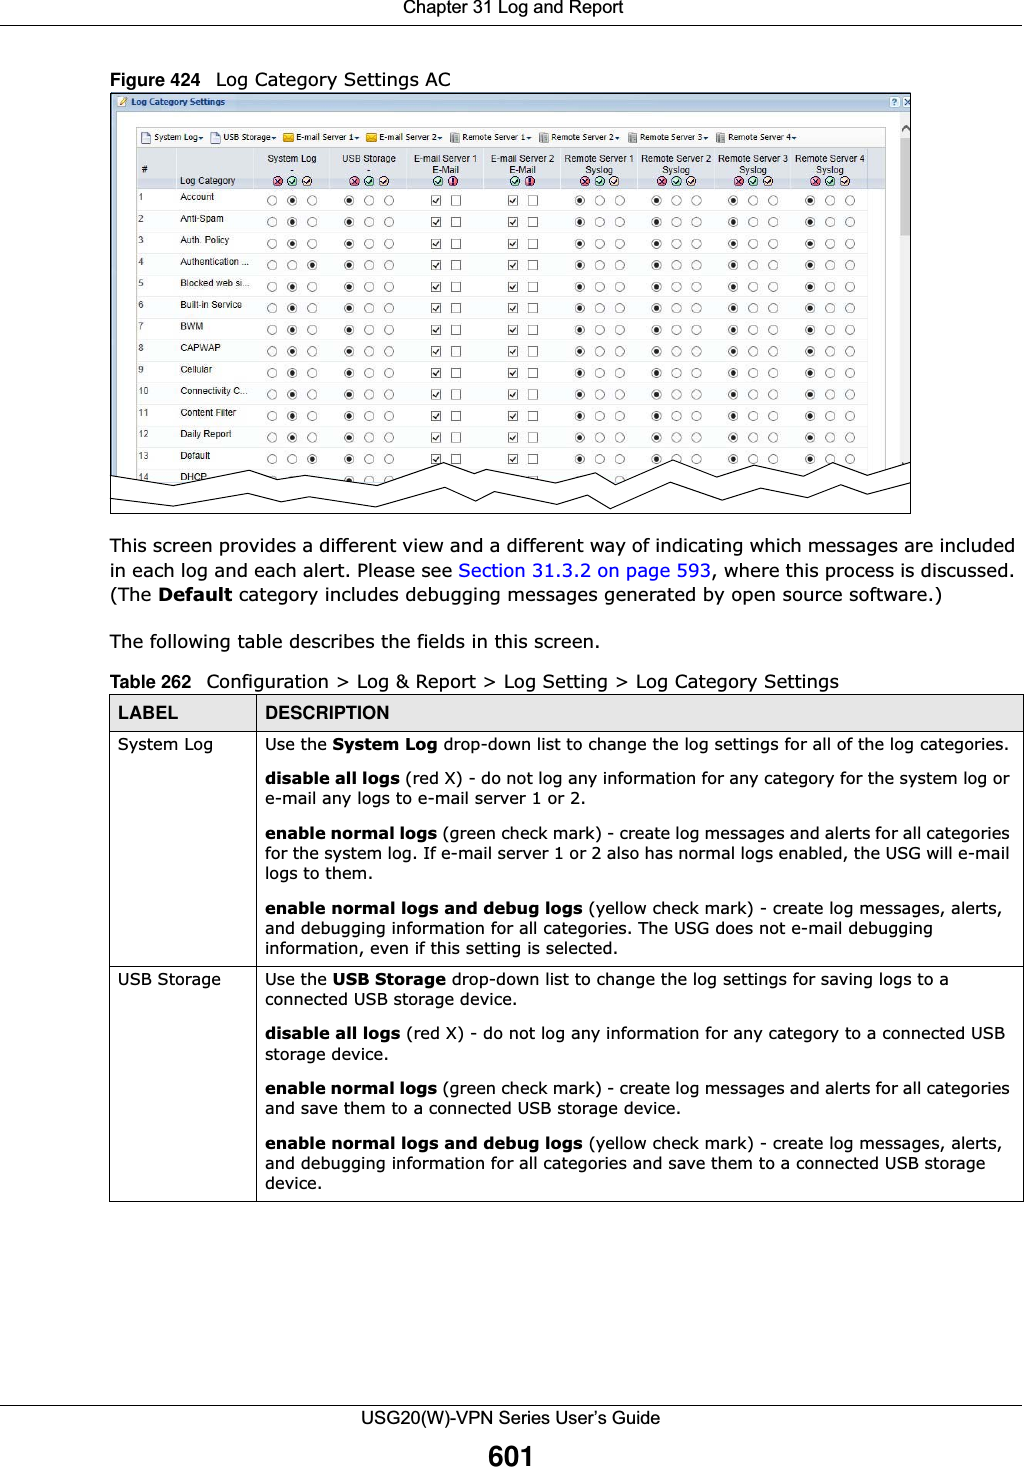  Chapter 31 Log and ReportUSG20(W)-VPN Series User’s Guide601Figure 424   Log Category Settings AC   This screen provides a different view and a different way of indicating which messages are included in each log and each alert. Please see Section 31.3.2 on page 593, where this process is discussed. (The Default category includes debugging messages generated by open source software.)The following table describes the fields in this screen.  Table 262   Configuration &gt; Log &amp; Report &gt; Log Setting &gt; Log Category SettingsLABEL DESCRIPTIONSystem Log Use the System Log drop-down list to change the log settings for all of the log categories.disable all logs (red X) - do not log any information for any category for the system log or e-mail any logs to e-mail server 1 or 2.enable normal logs (green check mark) - create log messages and alerts for all categories for the system log. If e-mail server 1 or 2 also has normal logs enabled, the USG will e-mail logs to them.enable normal logs and debug logs (yellow check mark) - create log messages, alerts, and debugging information for all categories. The USG does not e-mail debugging information, even if this setting is selected.USB Storage Use the USB Storage drop-down list to change the log settings for saving logs to a connected USB storage device.disable all logs (red X) - do not log any information for any category to a connected USB storage device.enable normal logs (green check mark) - create log messages and alerts for all categories and save them to a connected USB storage device.enable normal logs and debug logs (yellow check mark) - create log messages, alerts, and debugging information for all categories and save them to a connected USB storage device.